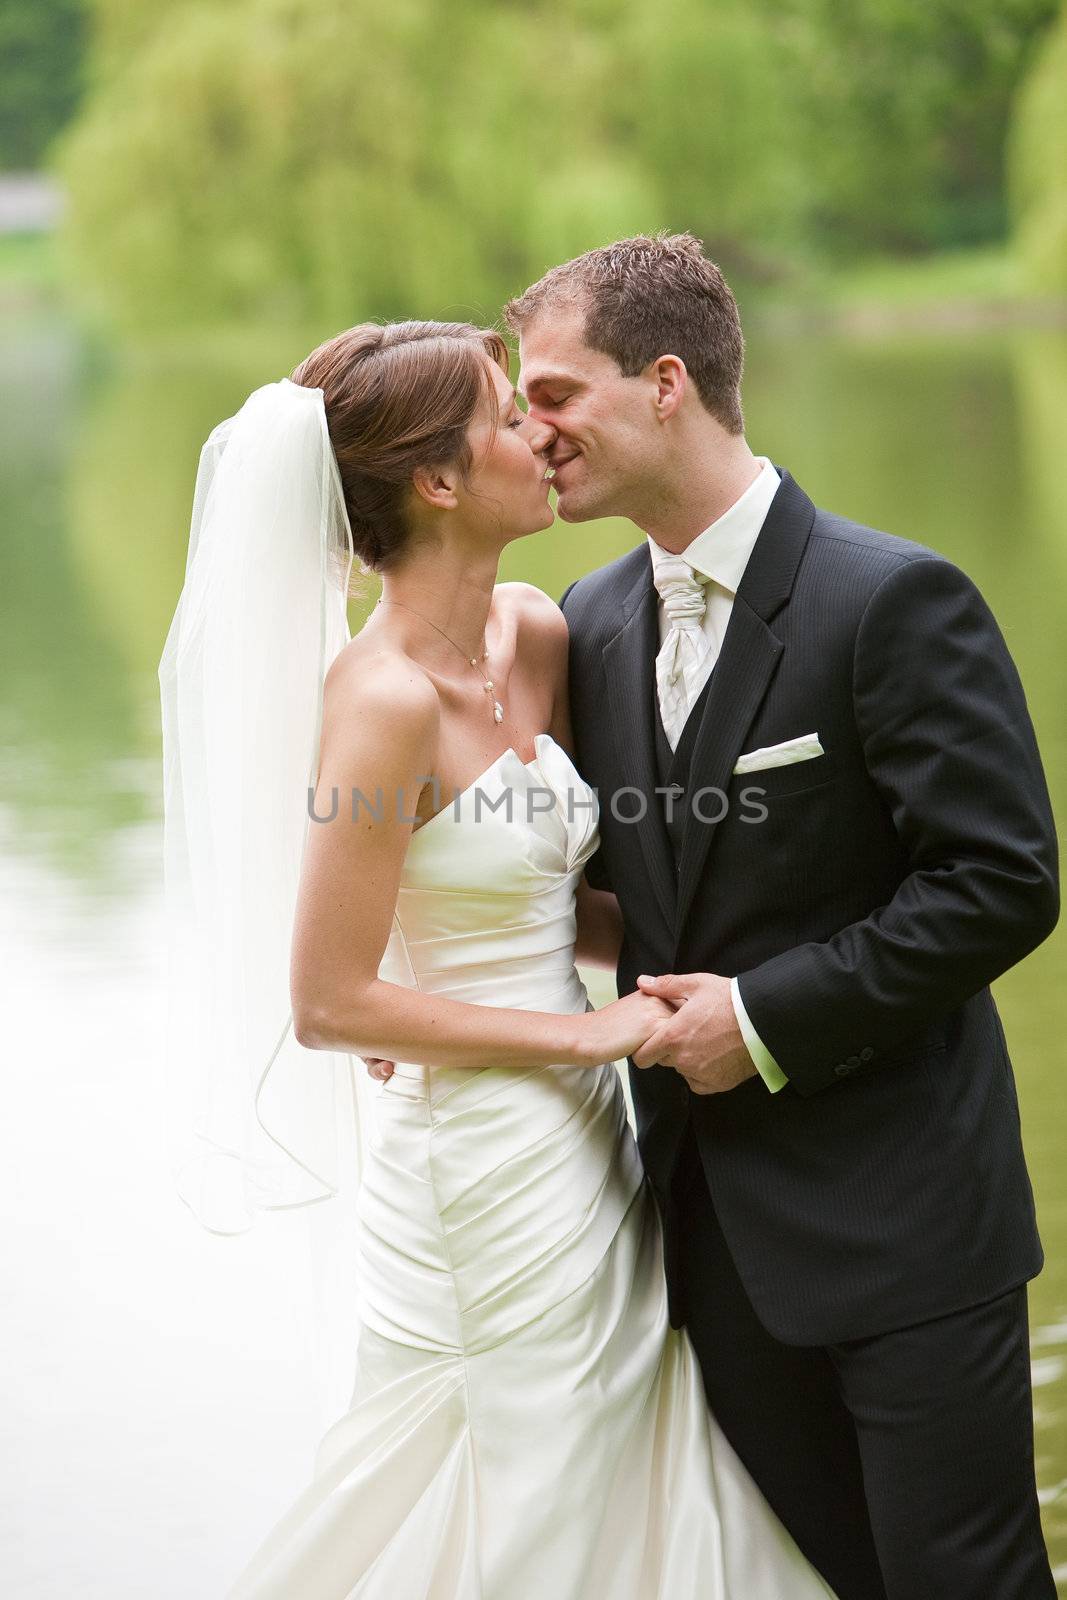 Young couple on their wedding day having a private moment